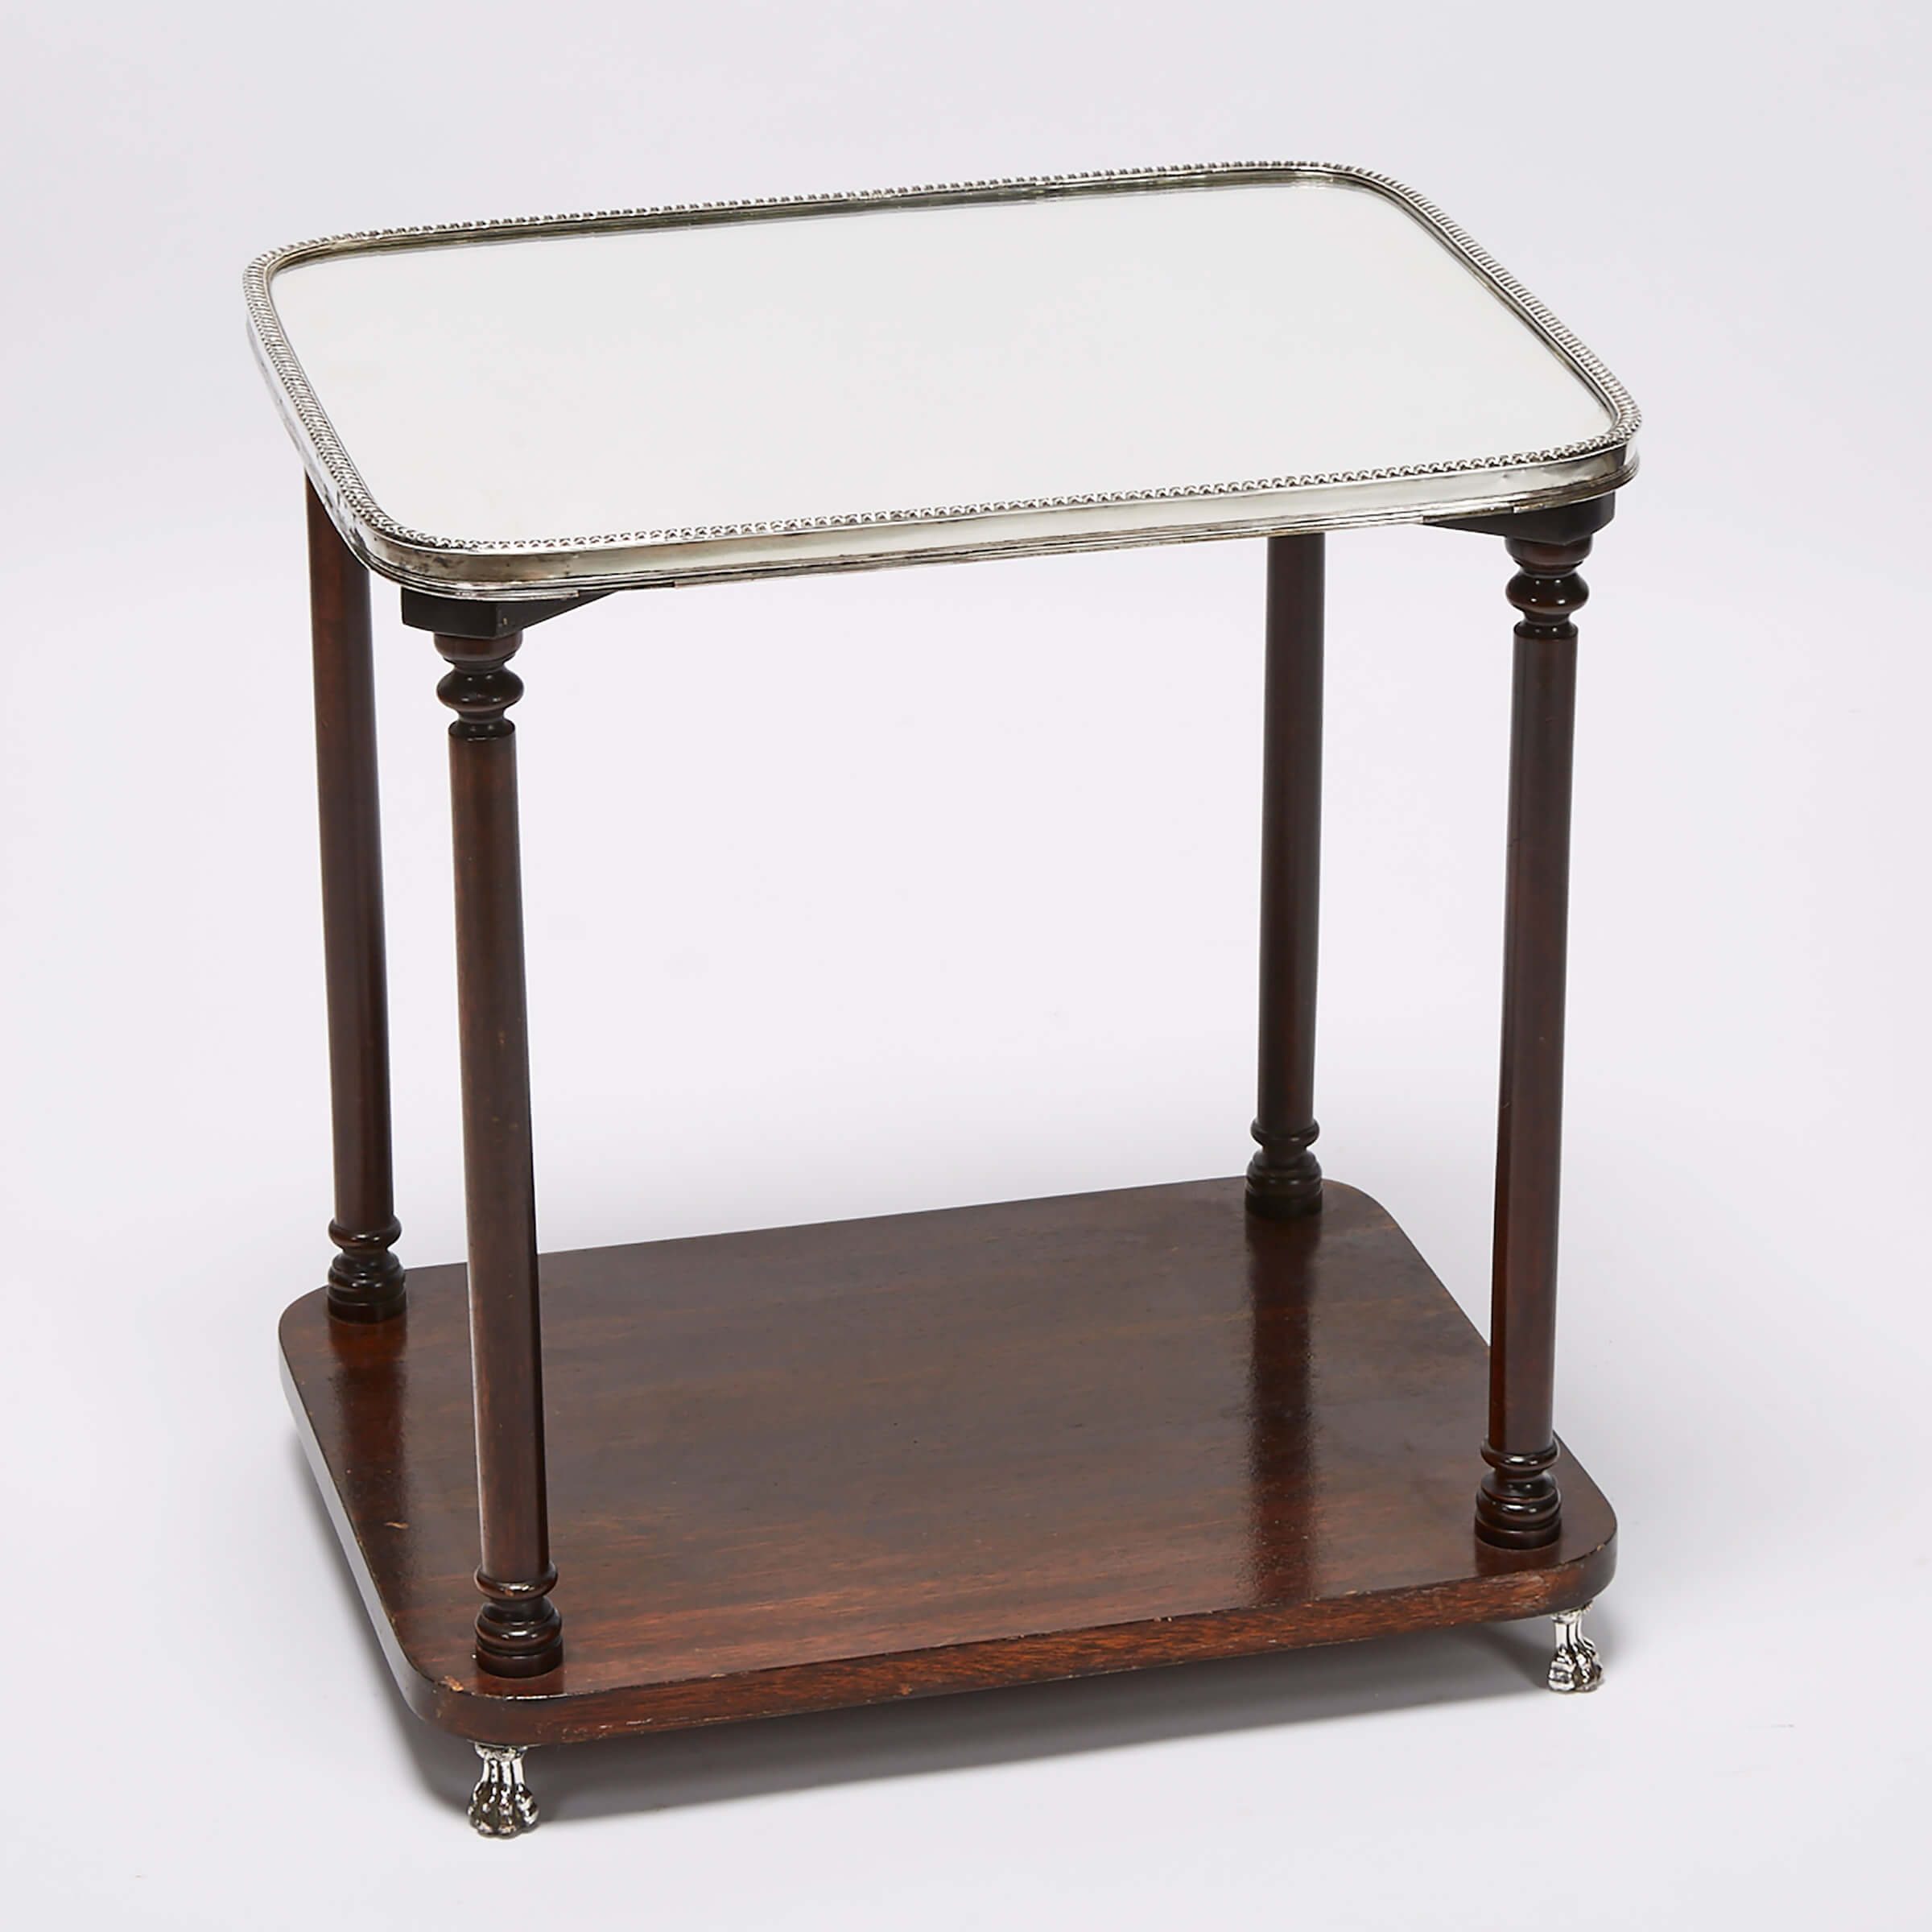 Edwardian Mahogany and Silvered Metal Occasional Table with Mirror Top, early 20th century